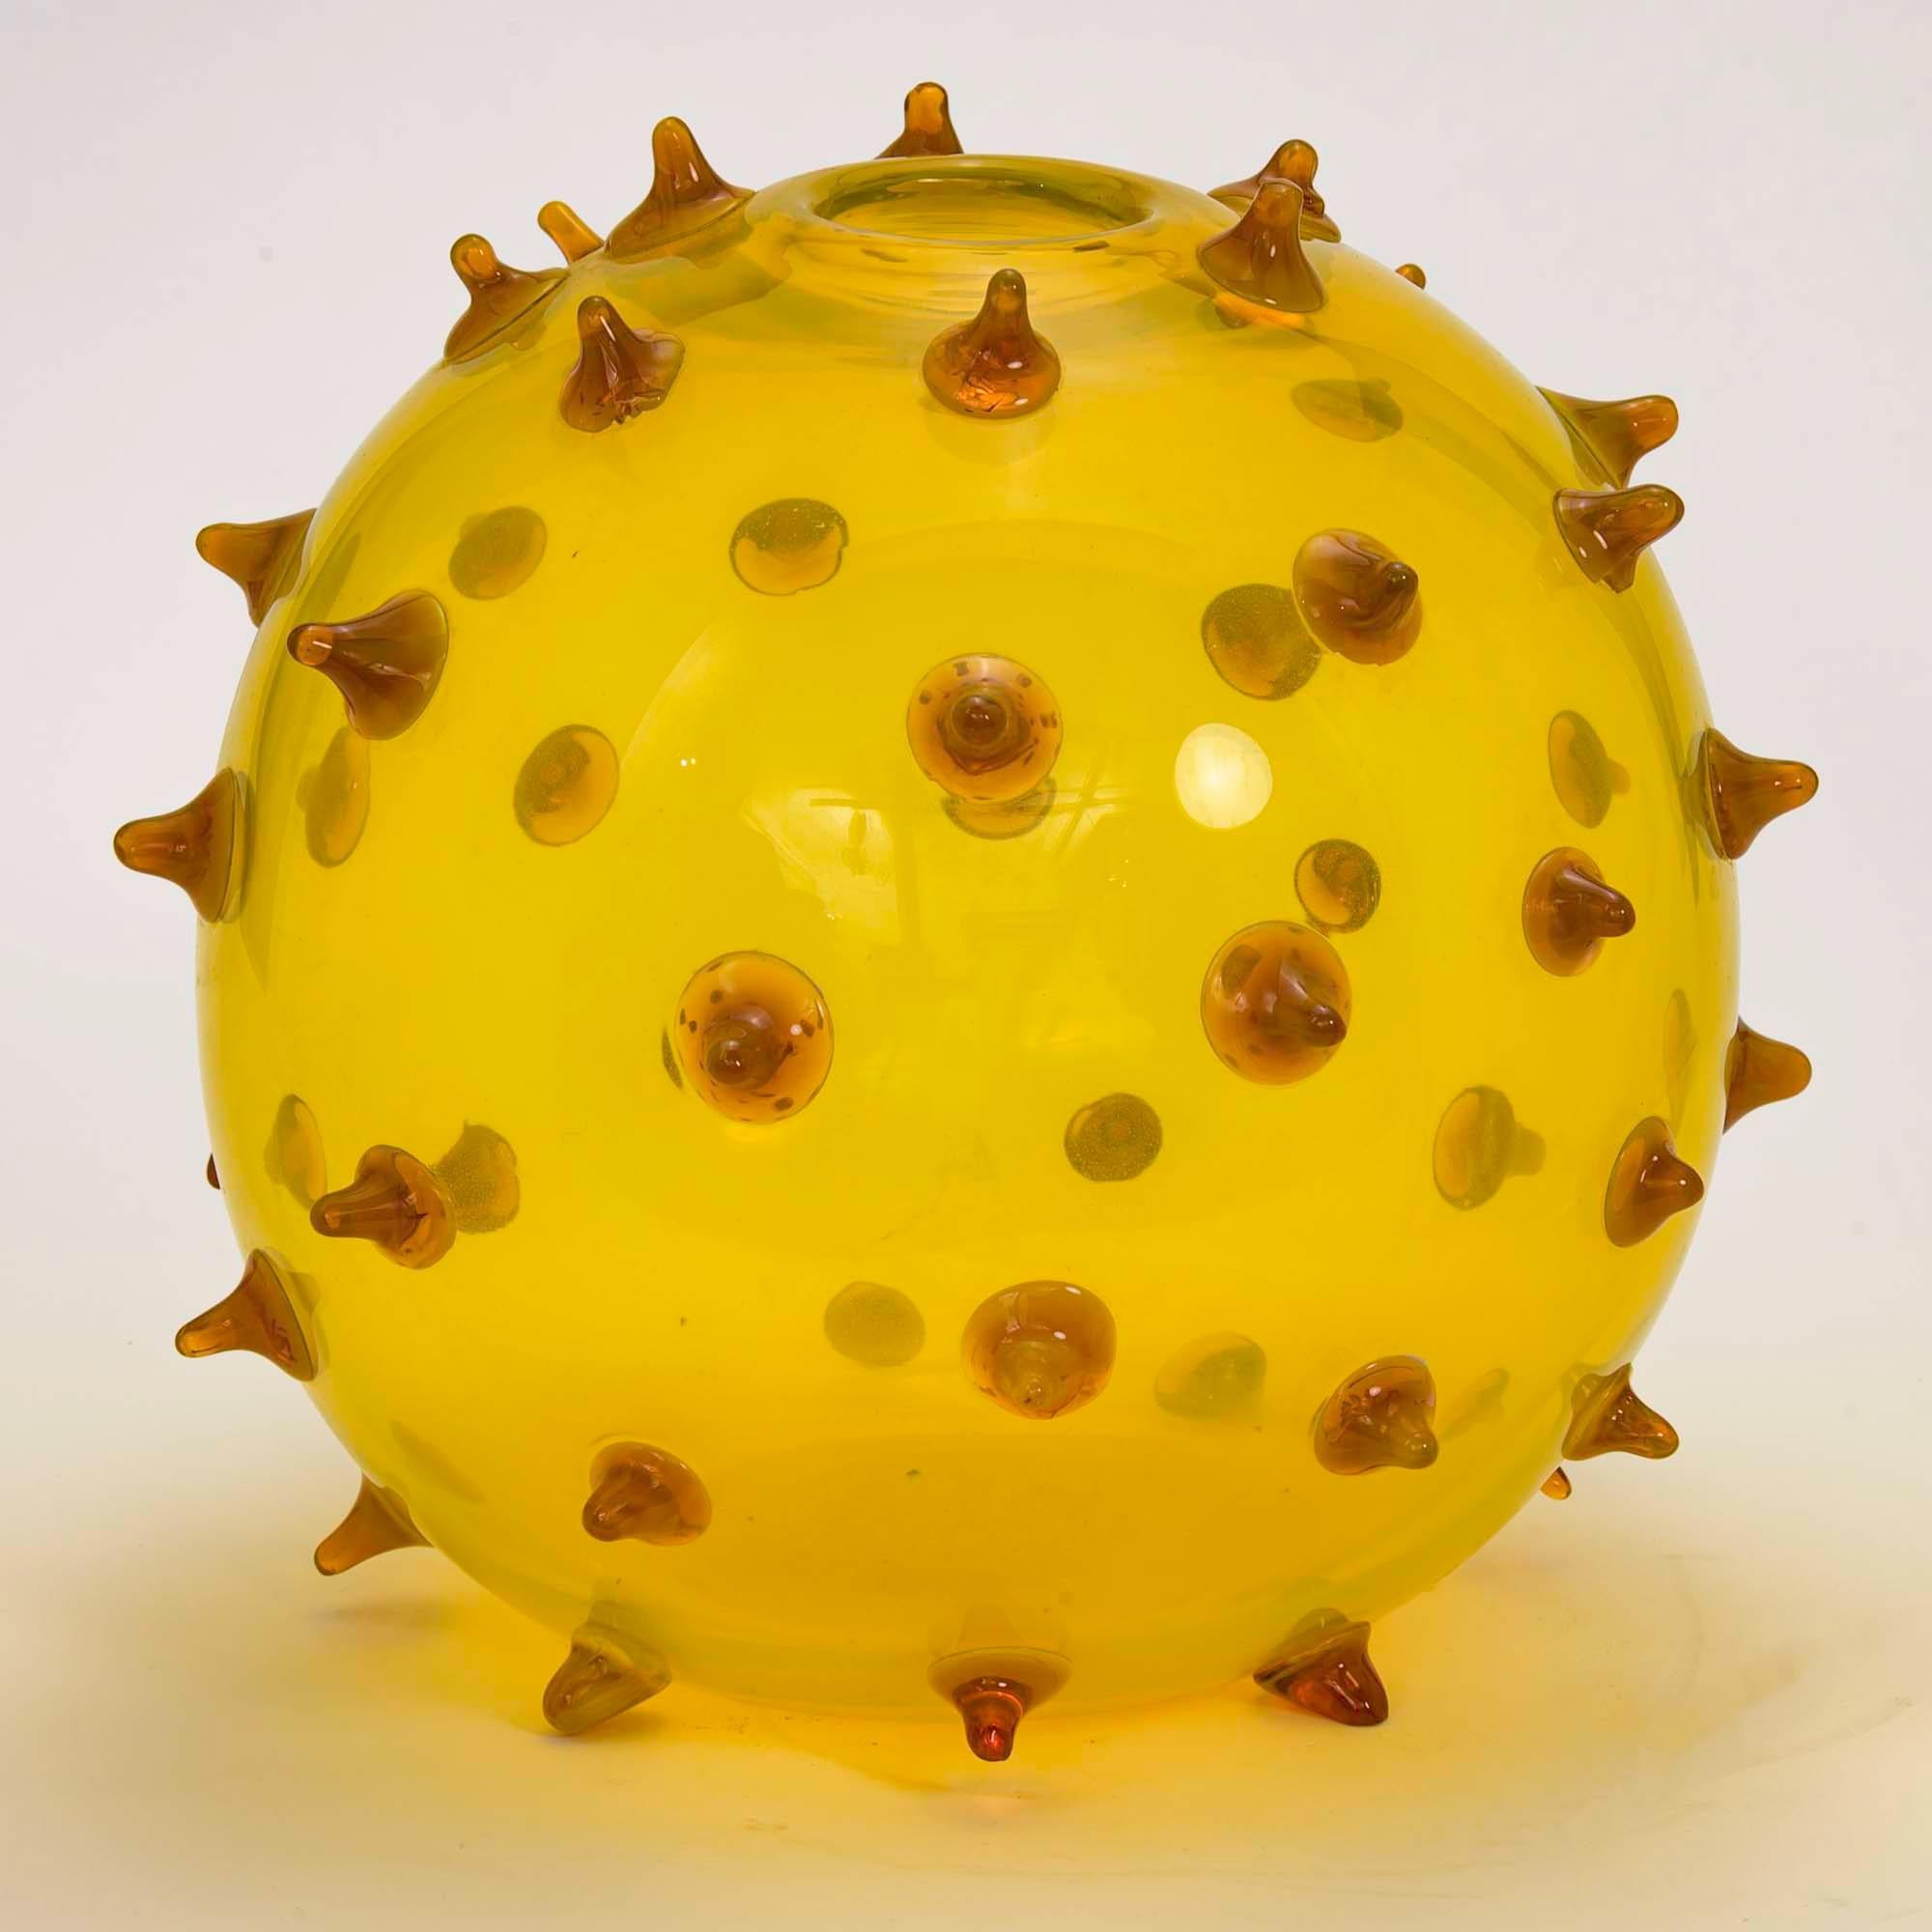 Beautiful and unusual organic sculptural vase made in bright yellow glass. 
Created by artist Pino Signoretto. (1944=2017). World renowned art glass artisan. Signed underneath. Excellent condition.